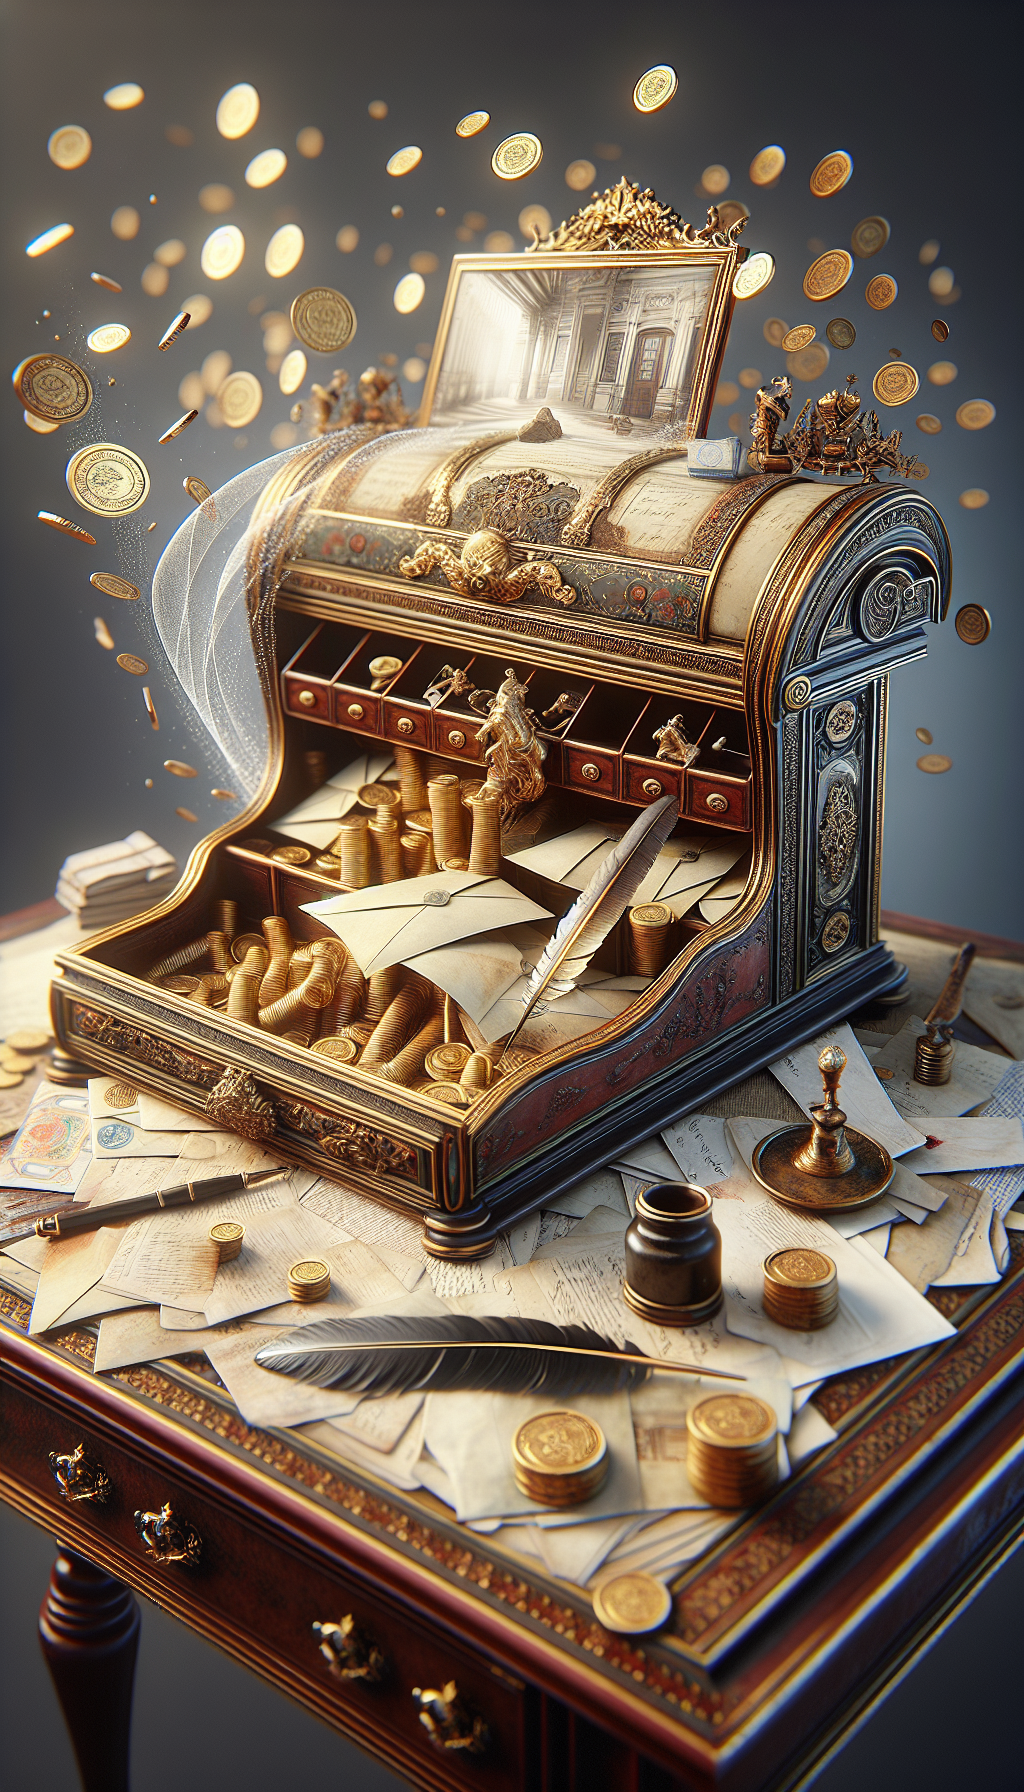 An ornate roll top desk sits center frame, partially unfurled to reveal intricate compartments with treasures inside: old letters, vintage stamps, and a quill pen. A ghostly transparent overlay shows a regal room from the past. Golden coins spill softly onto the desktop, symbolizing the desk's value. The style smoothly transitions from photorealism at the desk to an impressionistic historical scene.